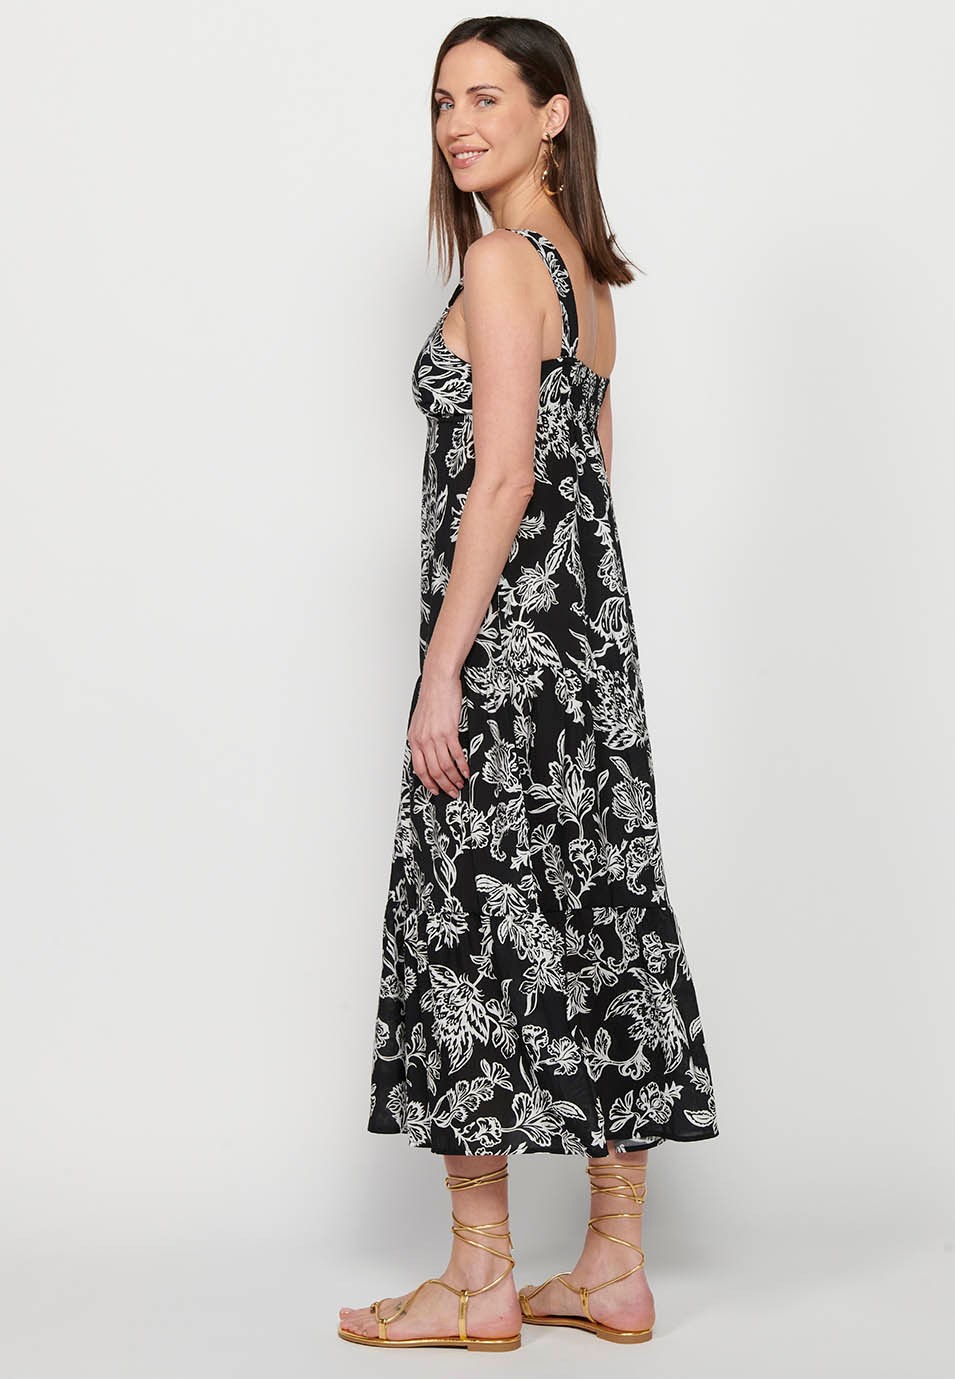 Long dress with wide straps with ruffle finish and V-neckline with floral print in Black for Women 4